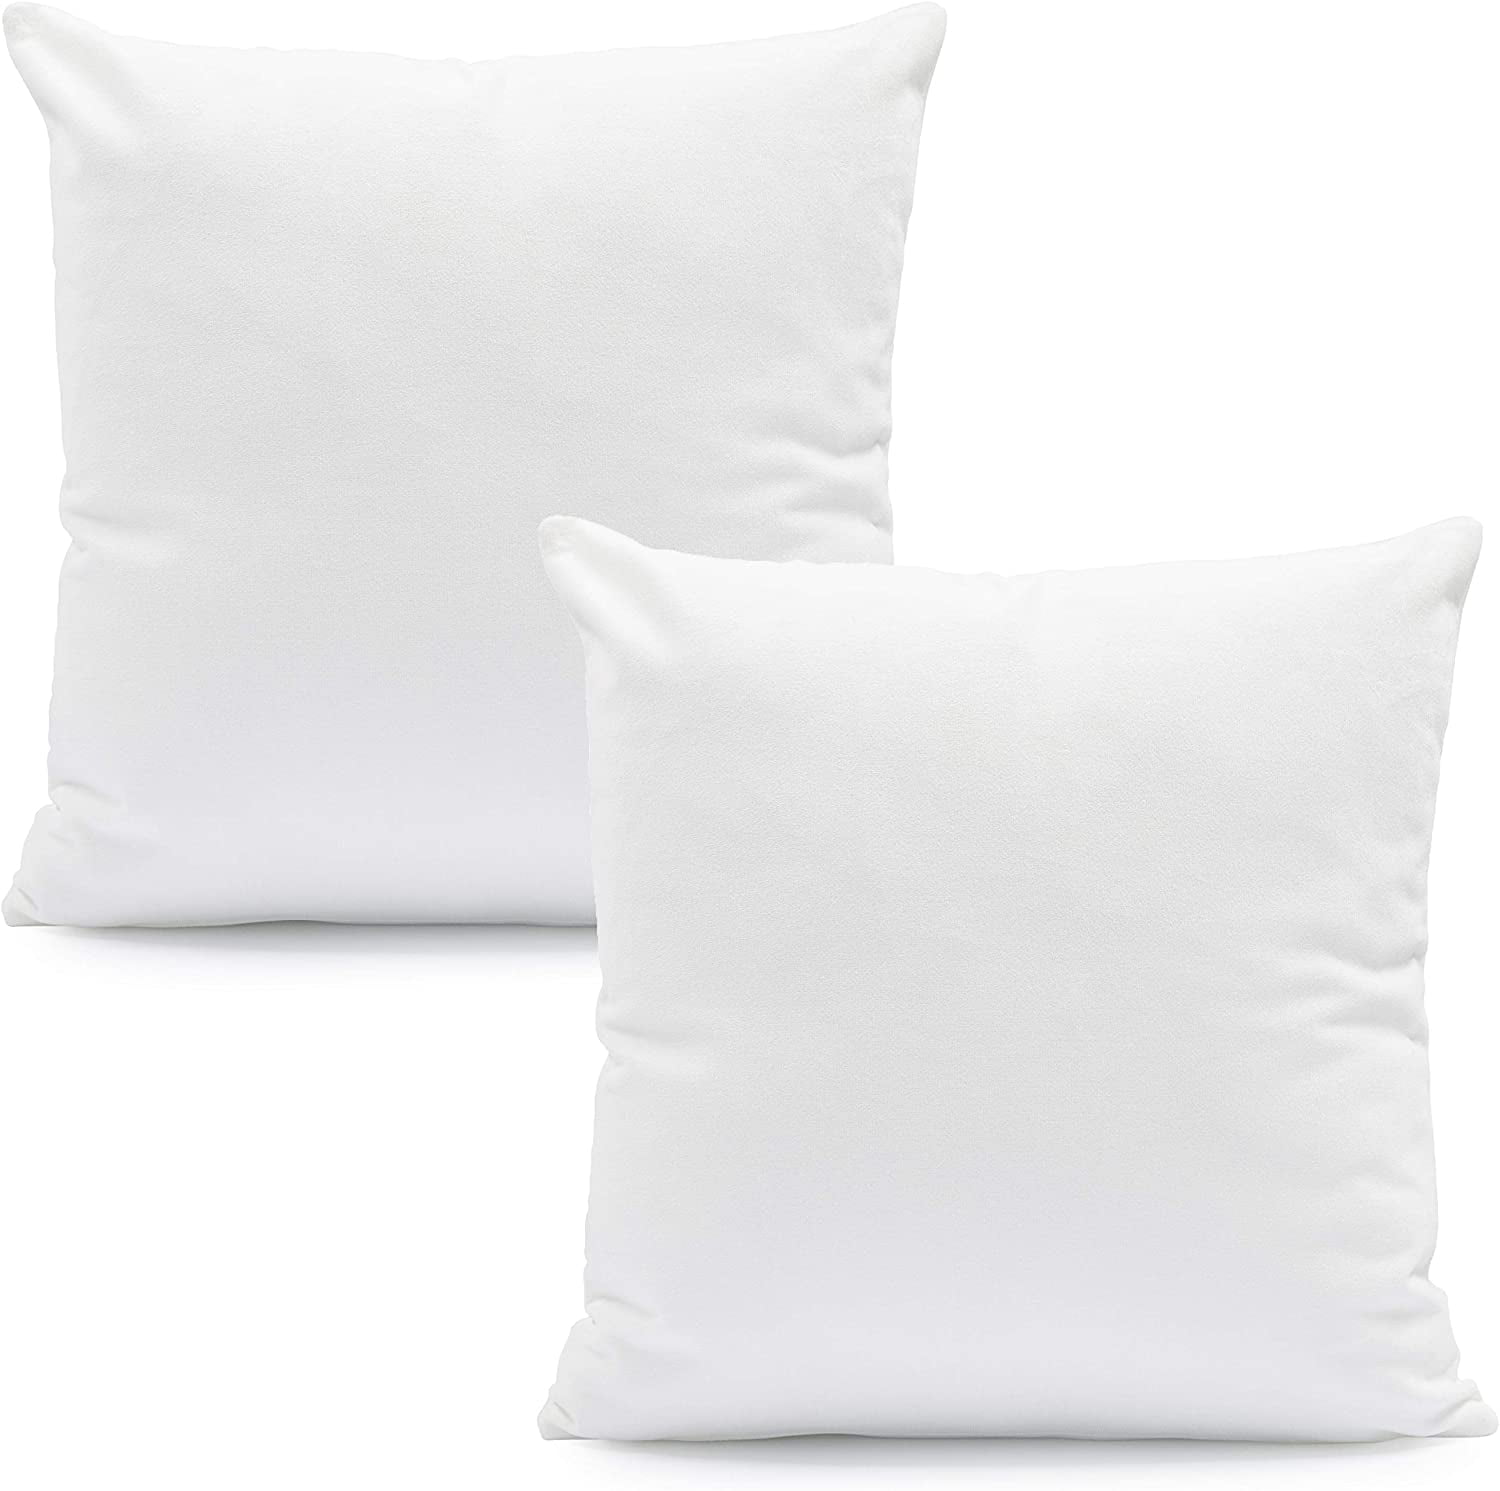 throw pillow sets for couch